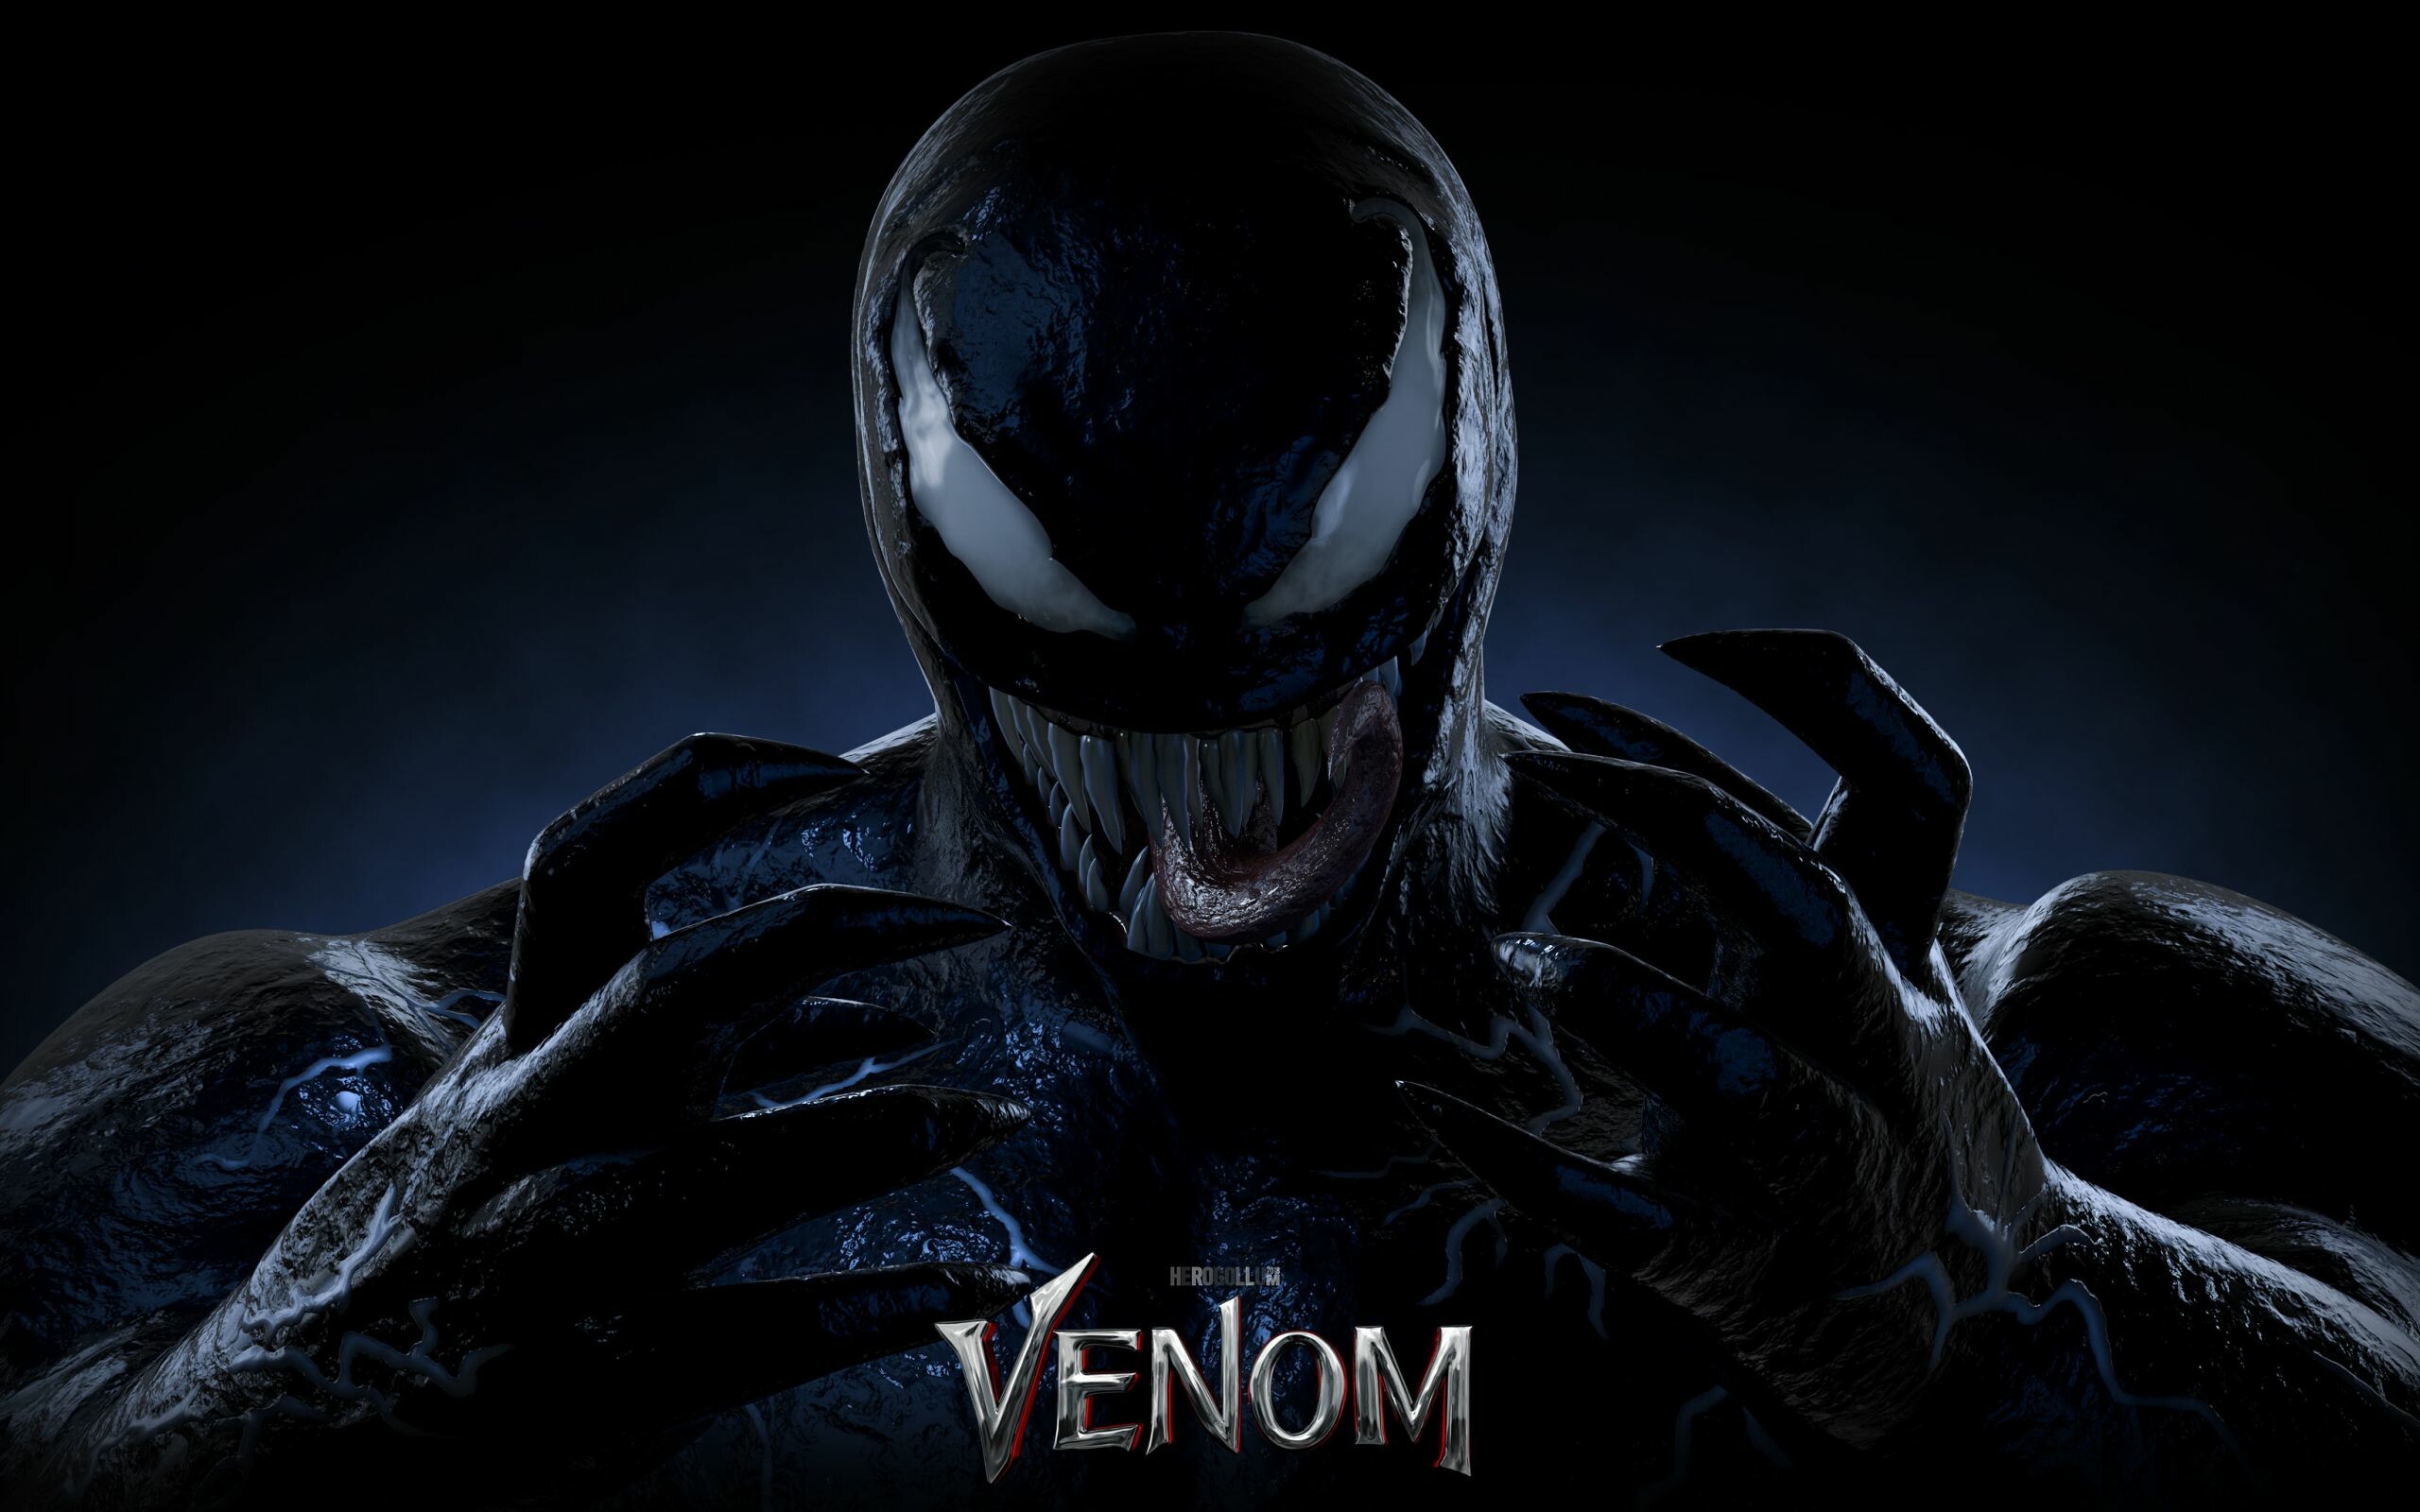 Venom: Marvel, Ranked 22nd on IGN's 100 Greatest Comic Villains of All Time. 2560x1600 HD Wallpaper.